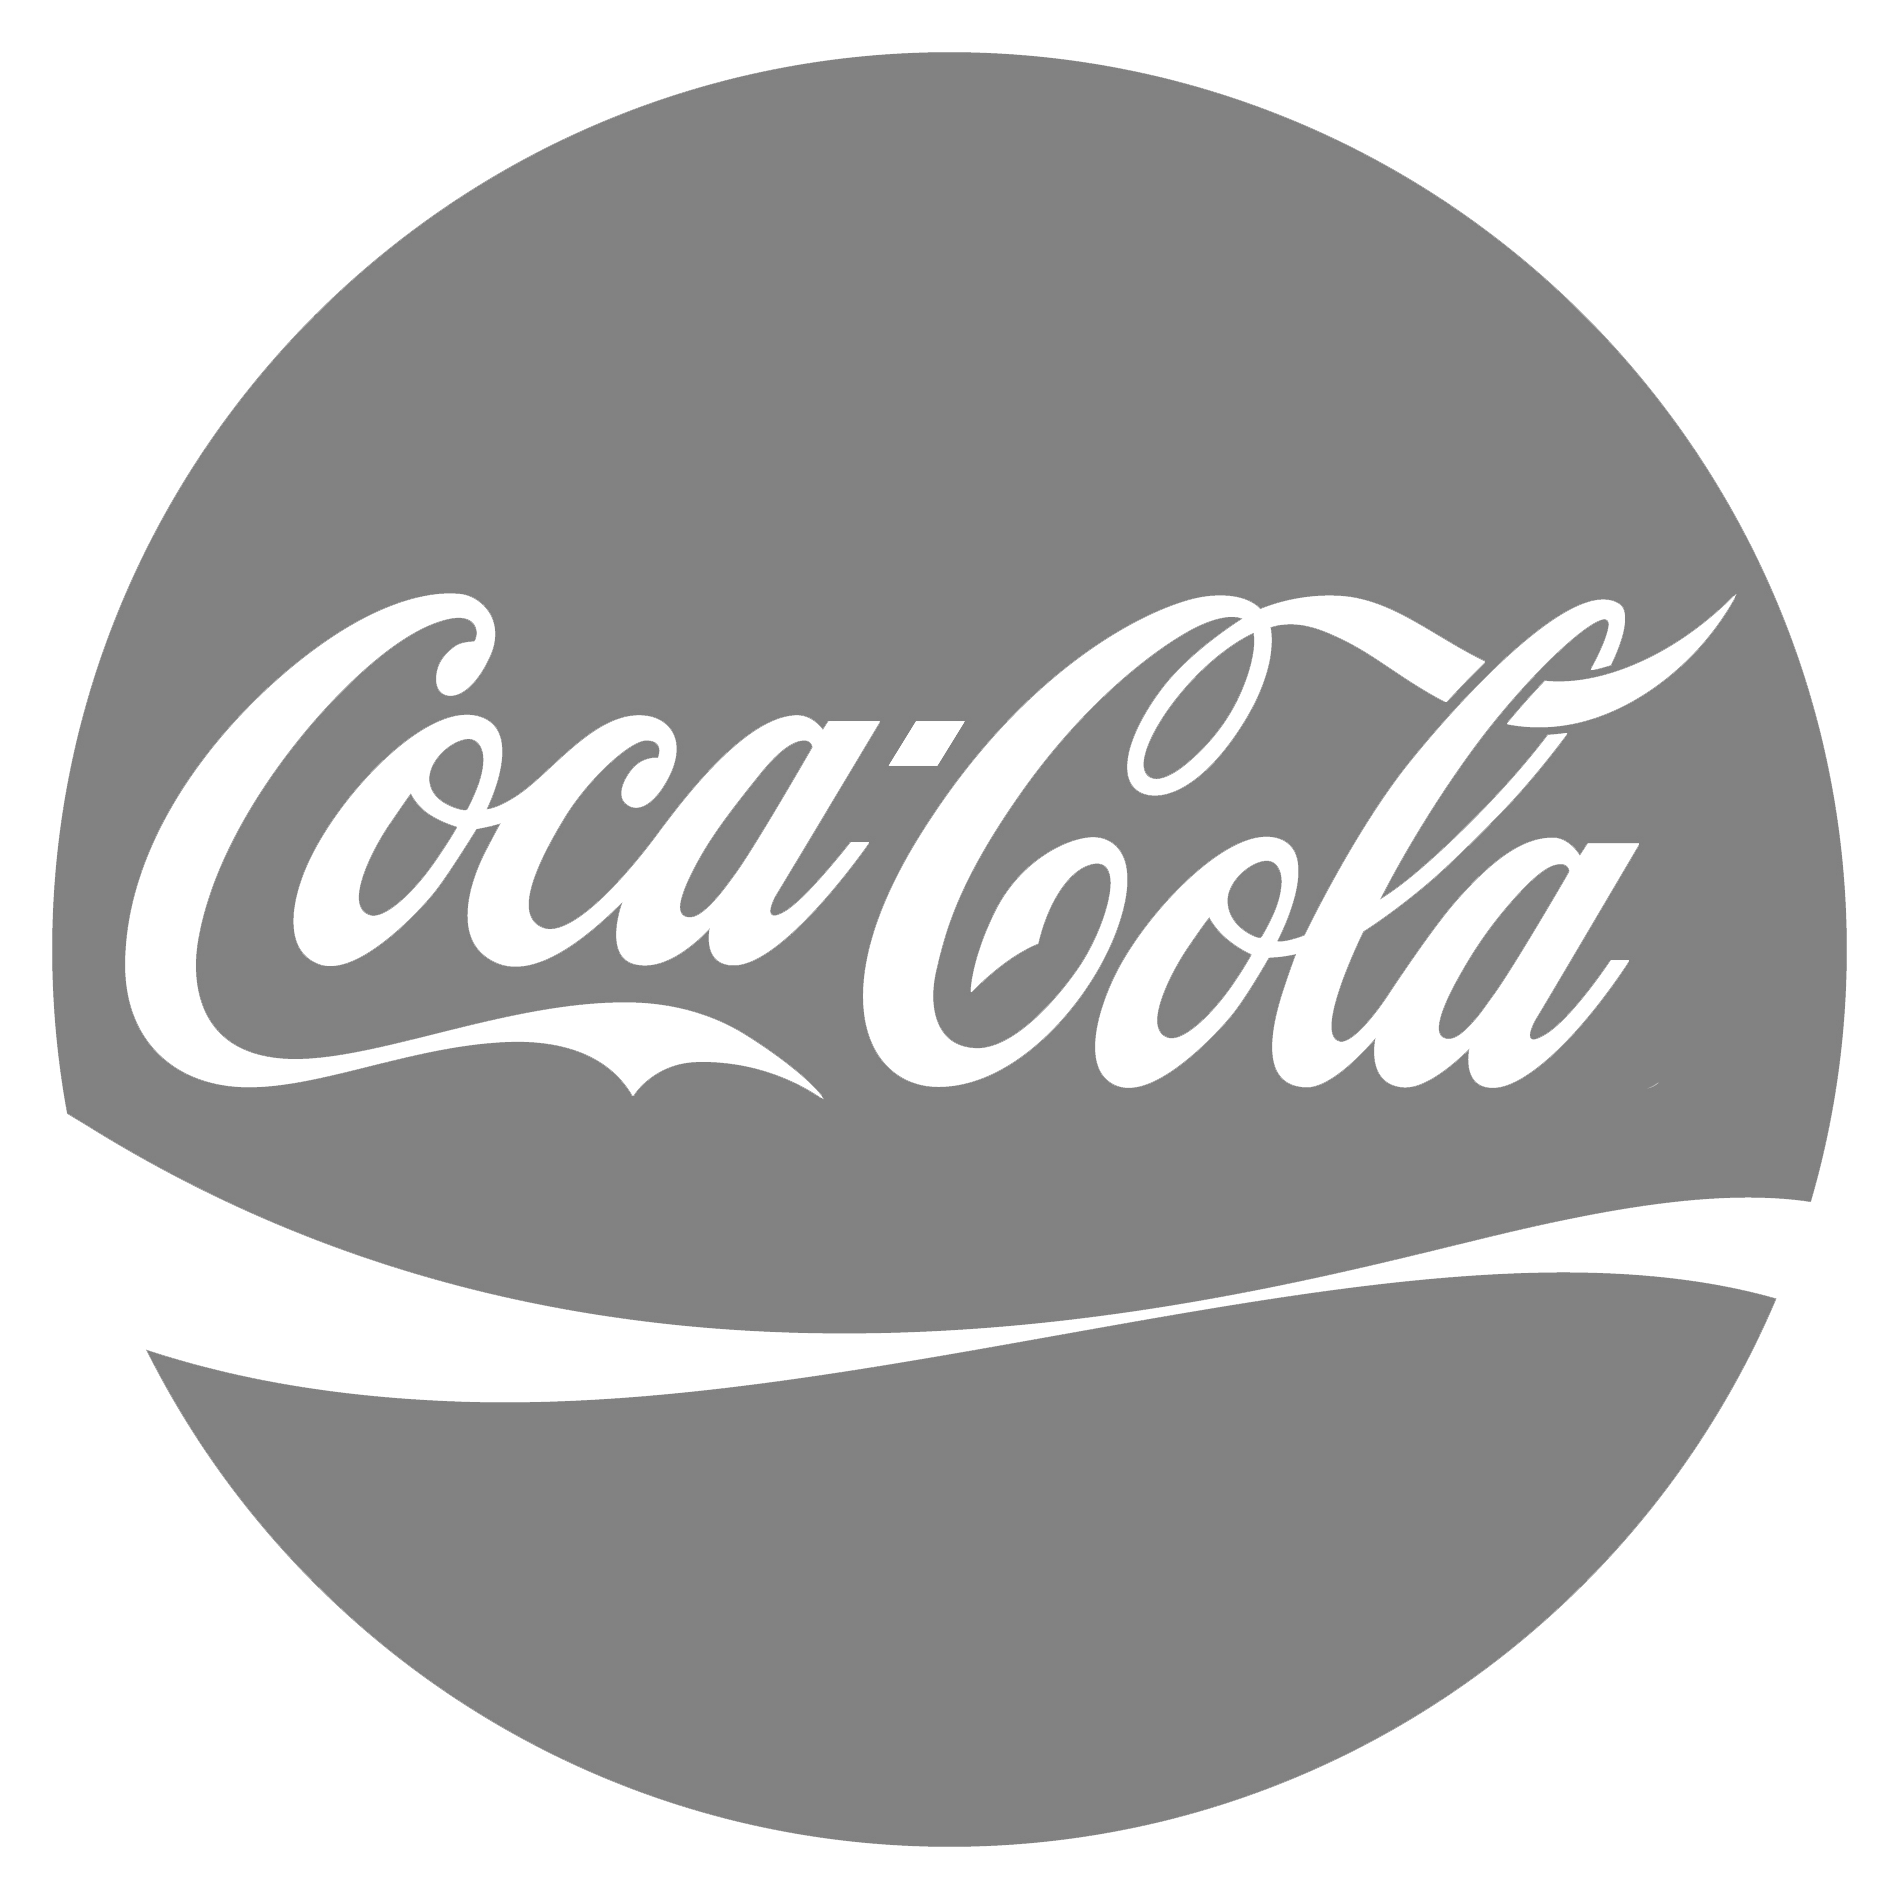 Coca Cola Circle Logo PNG Images Transparent Background | PNG Play